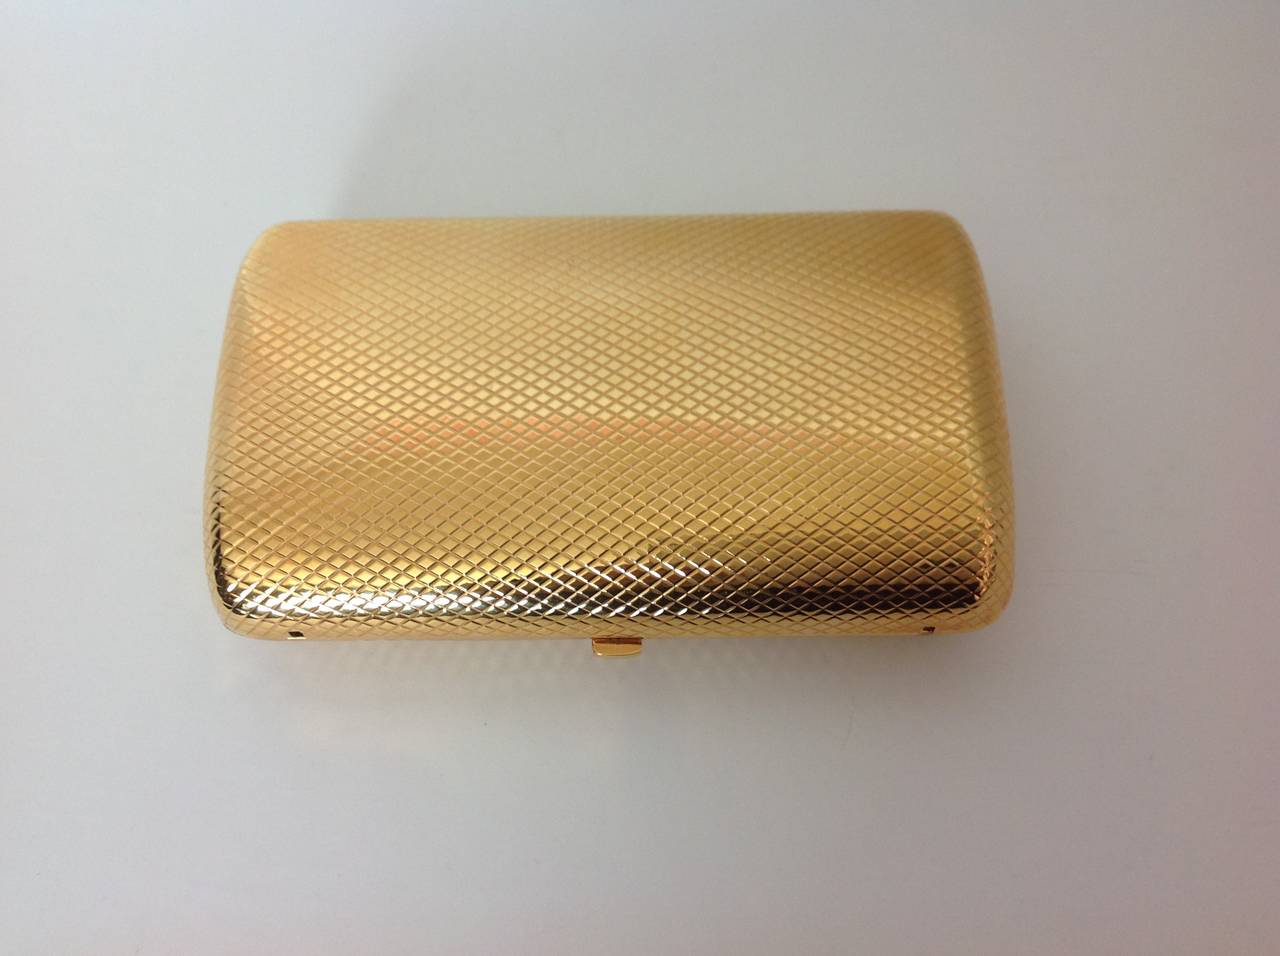 Monica Rich Kosann (jeweler) 24K goldplated minaudière clutch.
Pyramid guilloche pattern.  
Perfect condition,still has tags! (tag reads $4855.)  NO dents (difficult to photograph), no scratches, no smell.
Lined in marigold calfskin, with a MRK